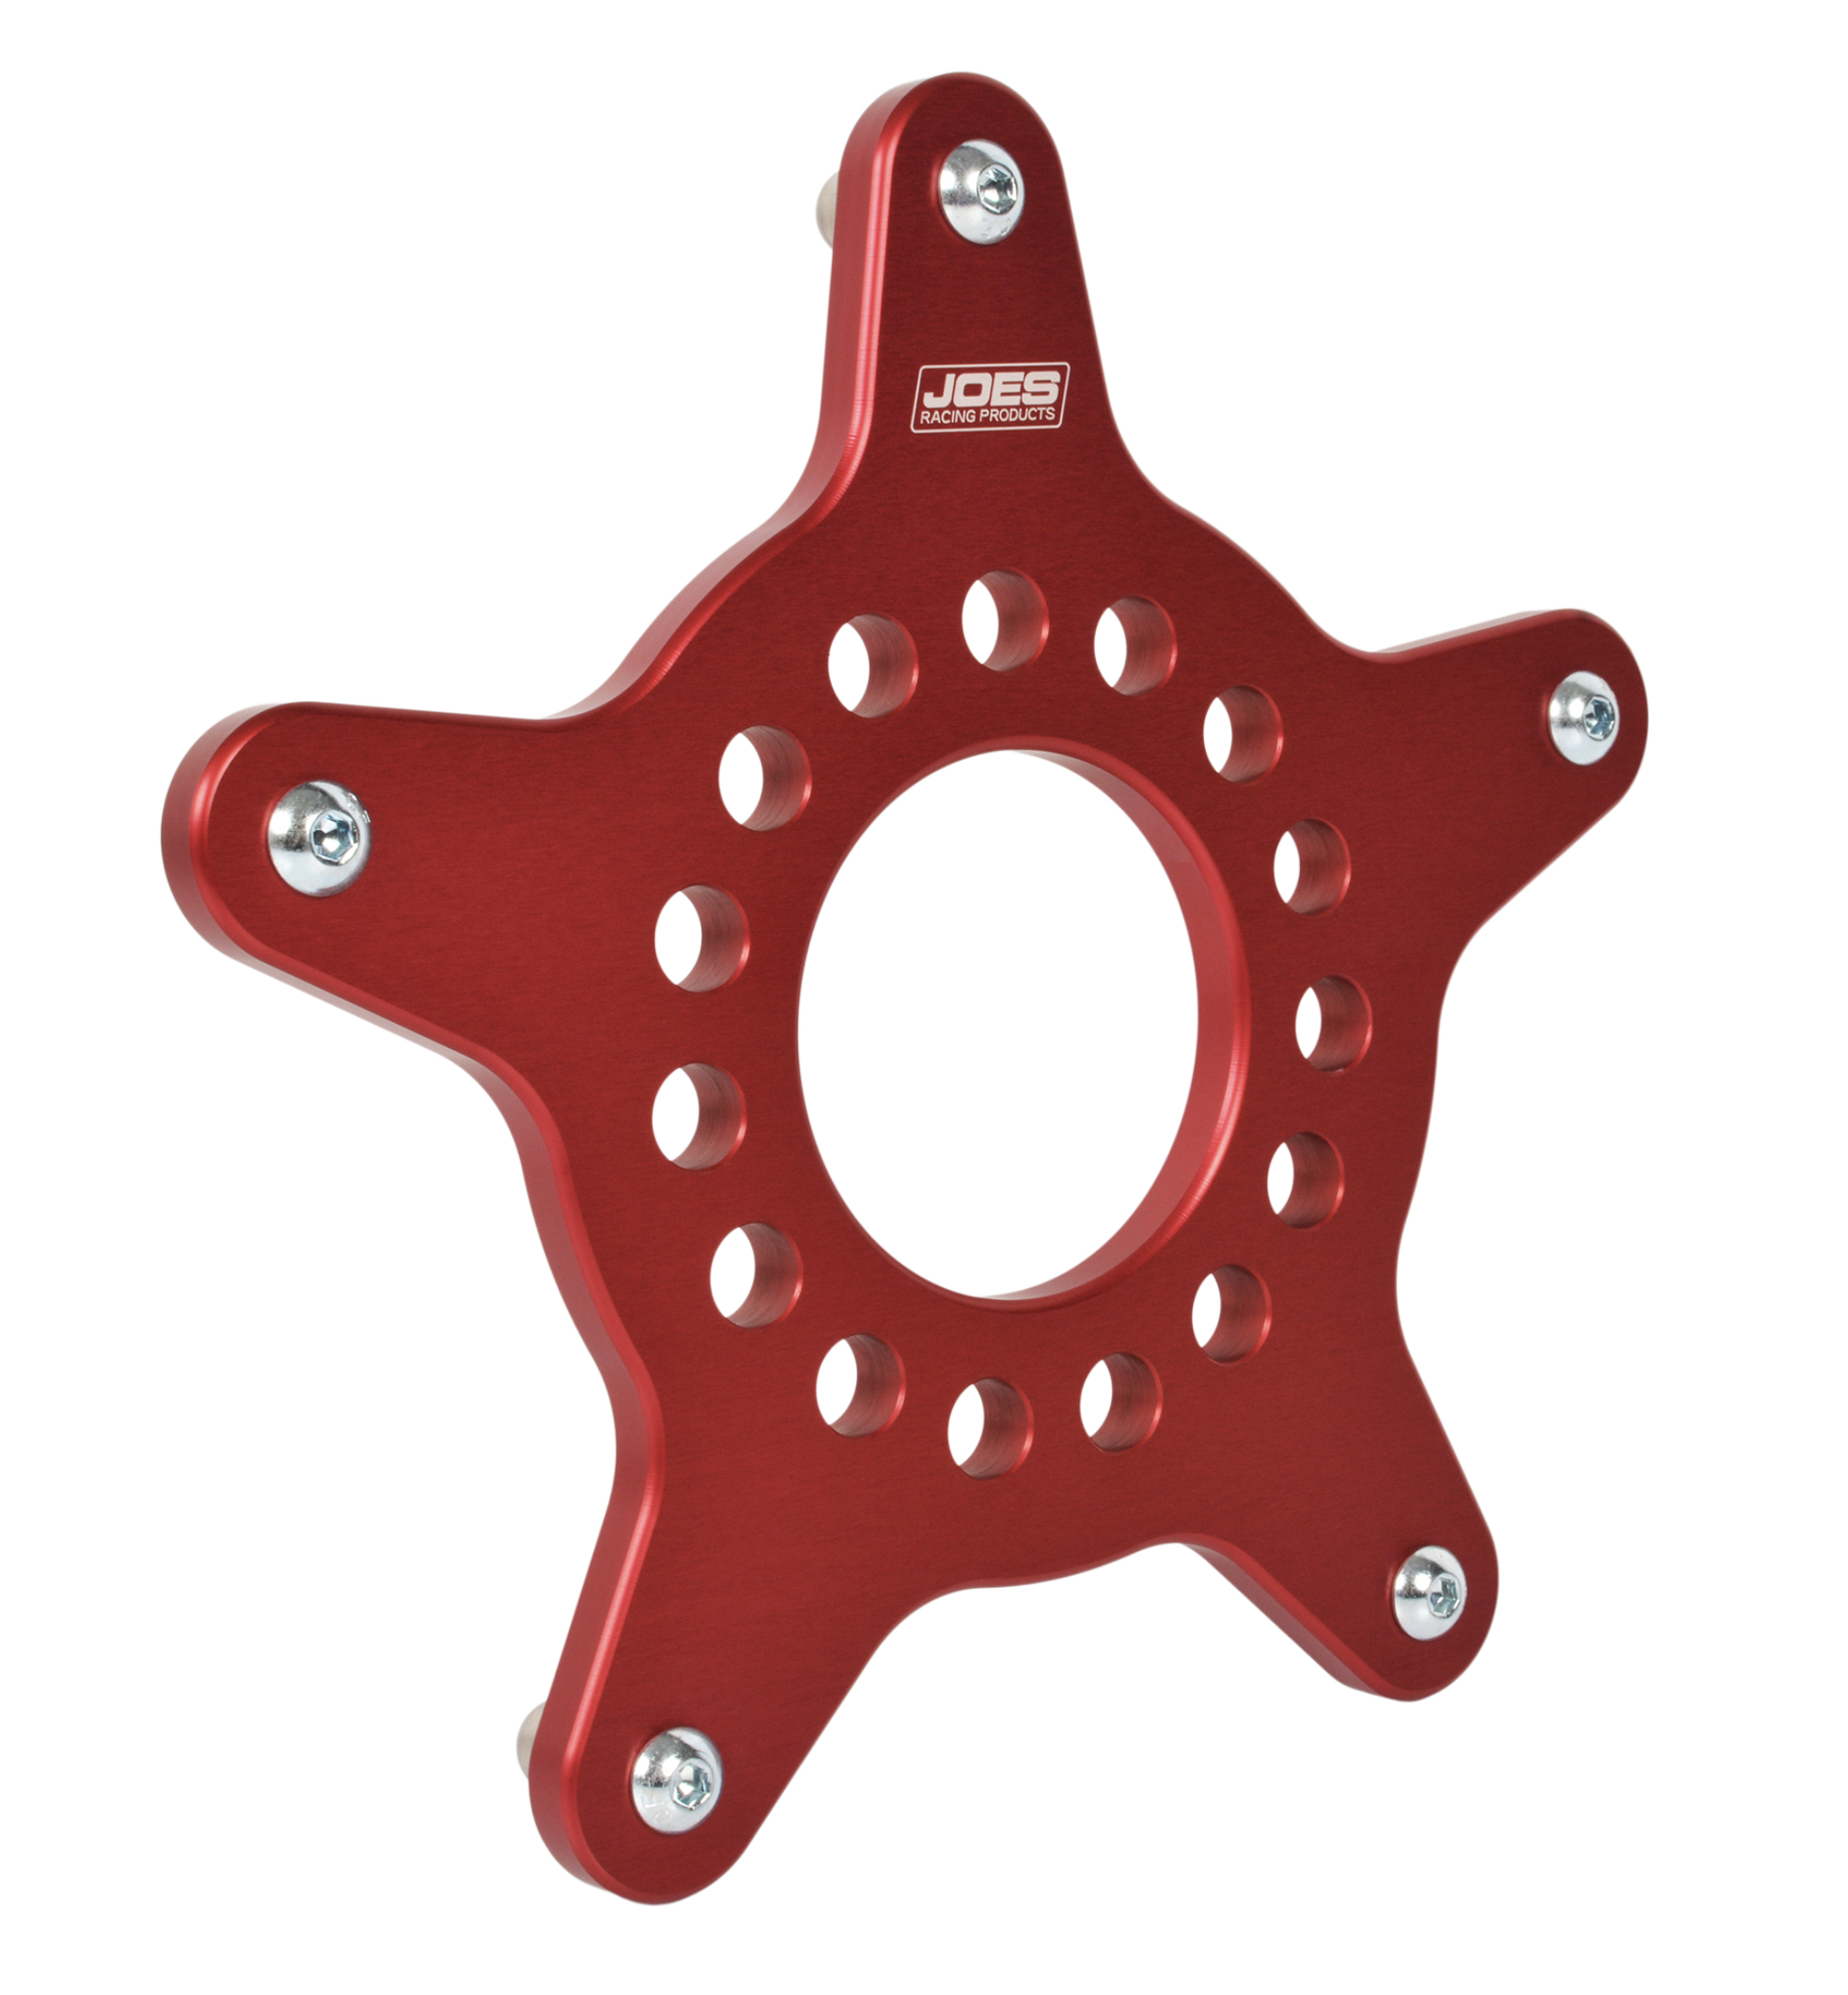 Joes Racing Products 29520 Wheel Adapter, Wide 5 to Tire Machine Pin, Dowel Pins, Billet Aluminum, Red Anodized, Each